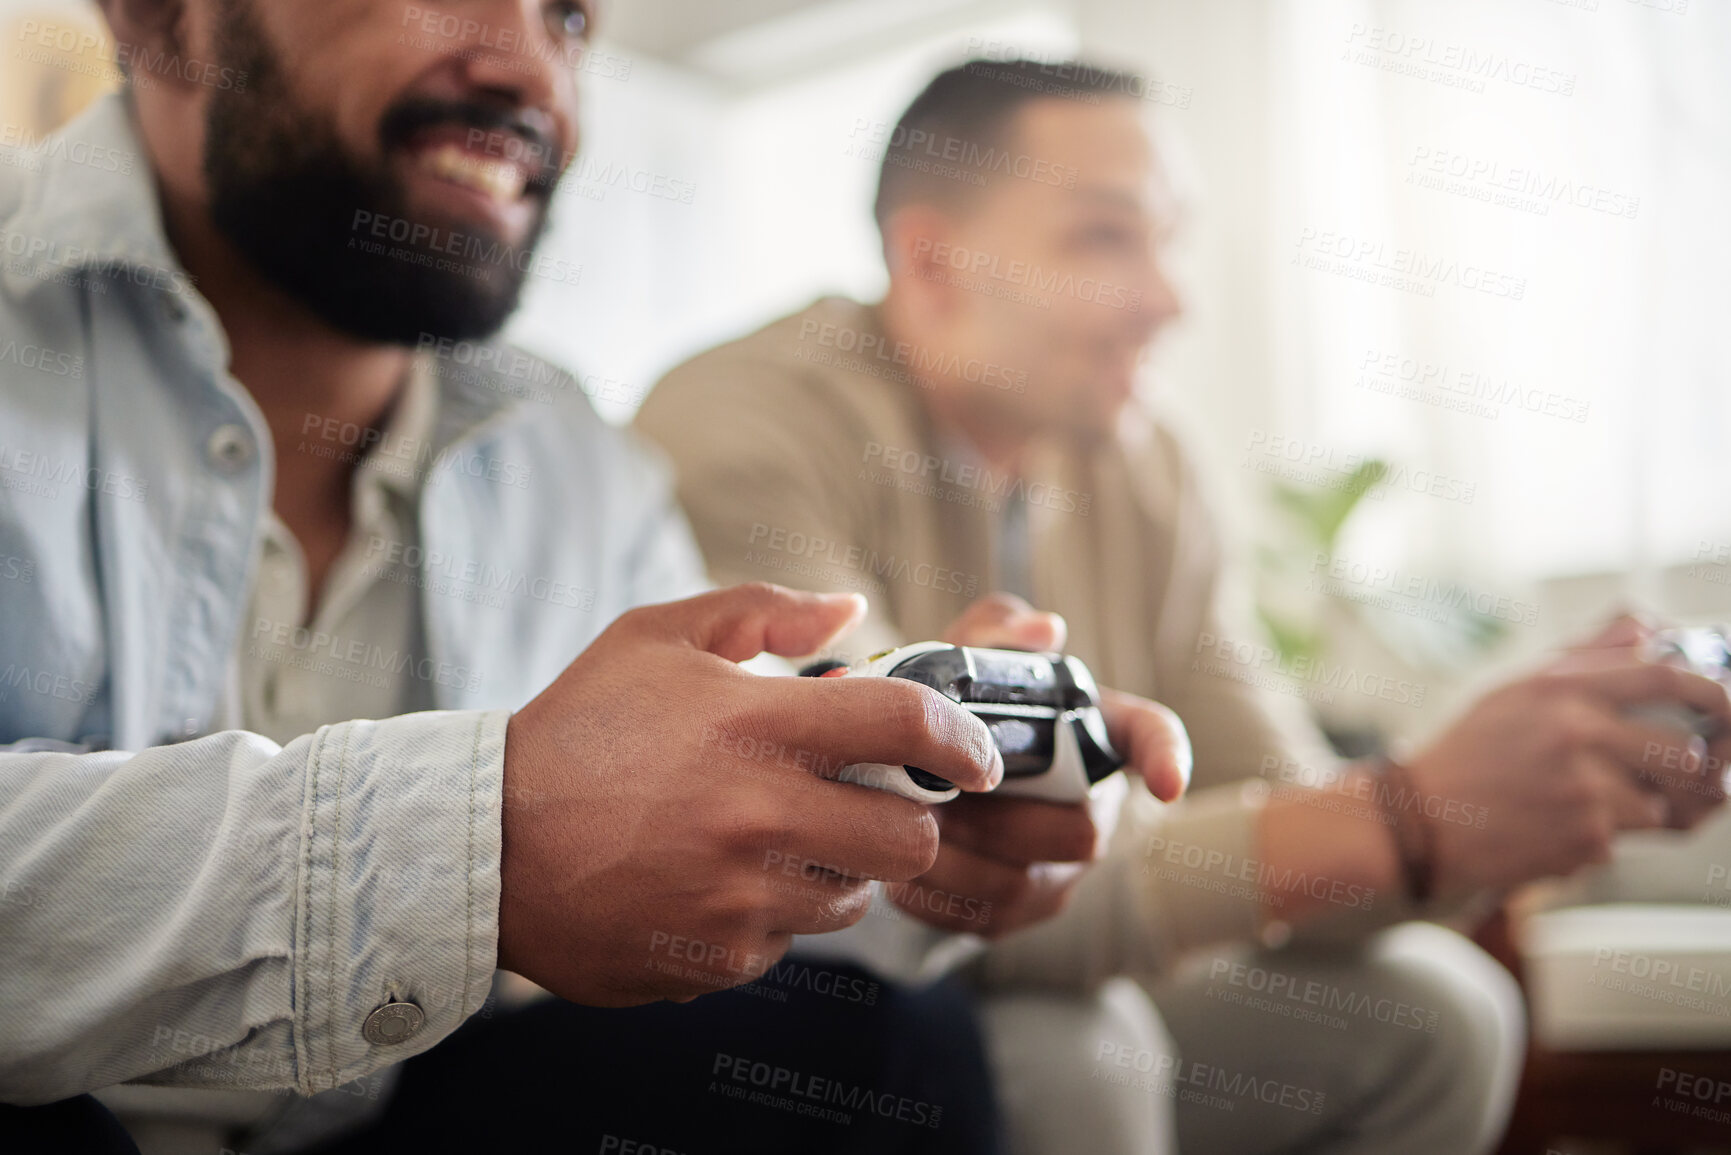 Buy stock photo Shot of two men playing video games while sitting on a couch together